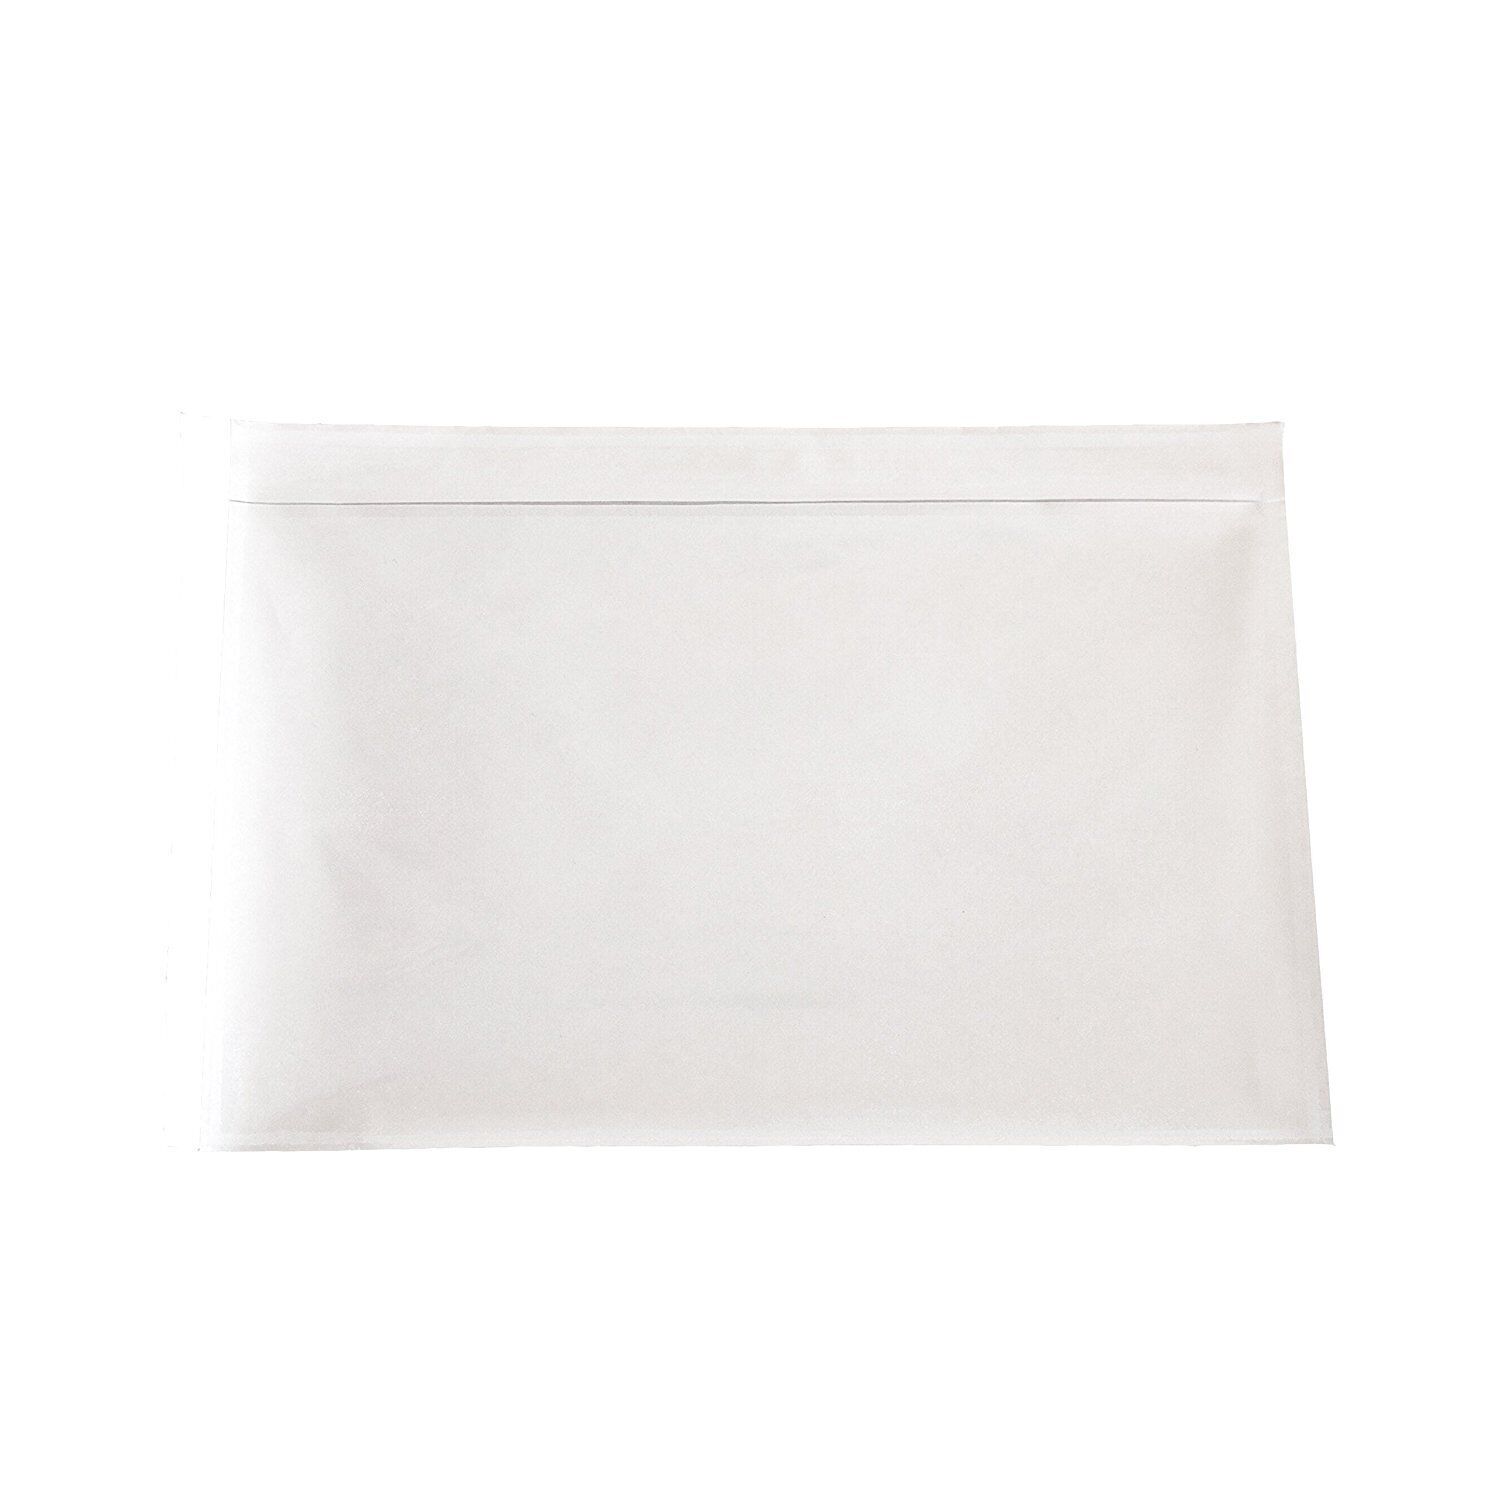 100 Clear Envelope Pouches 6x9 Slip Plastic Self Adhesive Shipping Label Packing Unbranded Does not apply - фотография #5